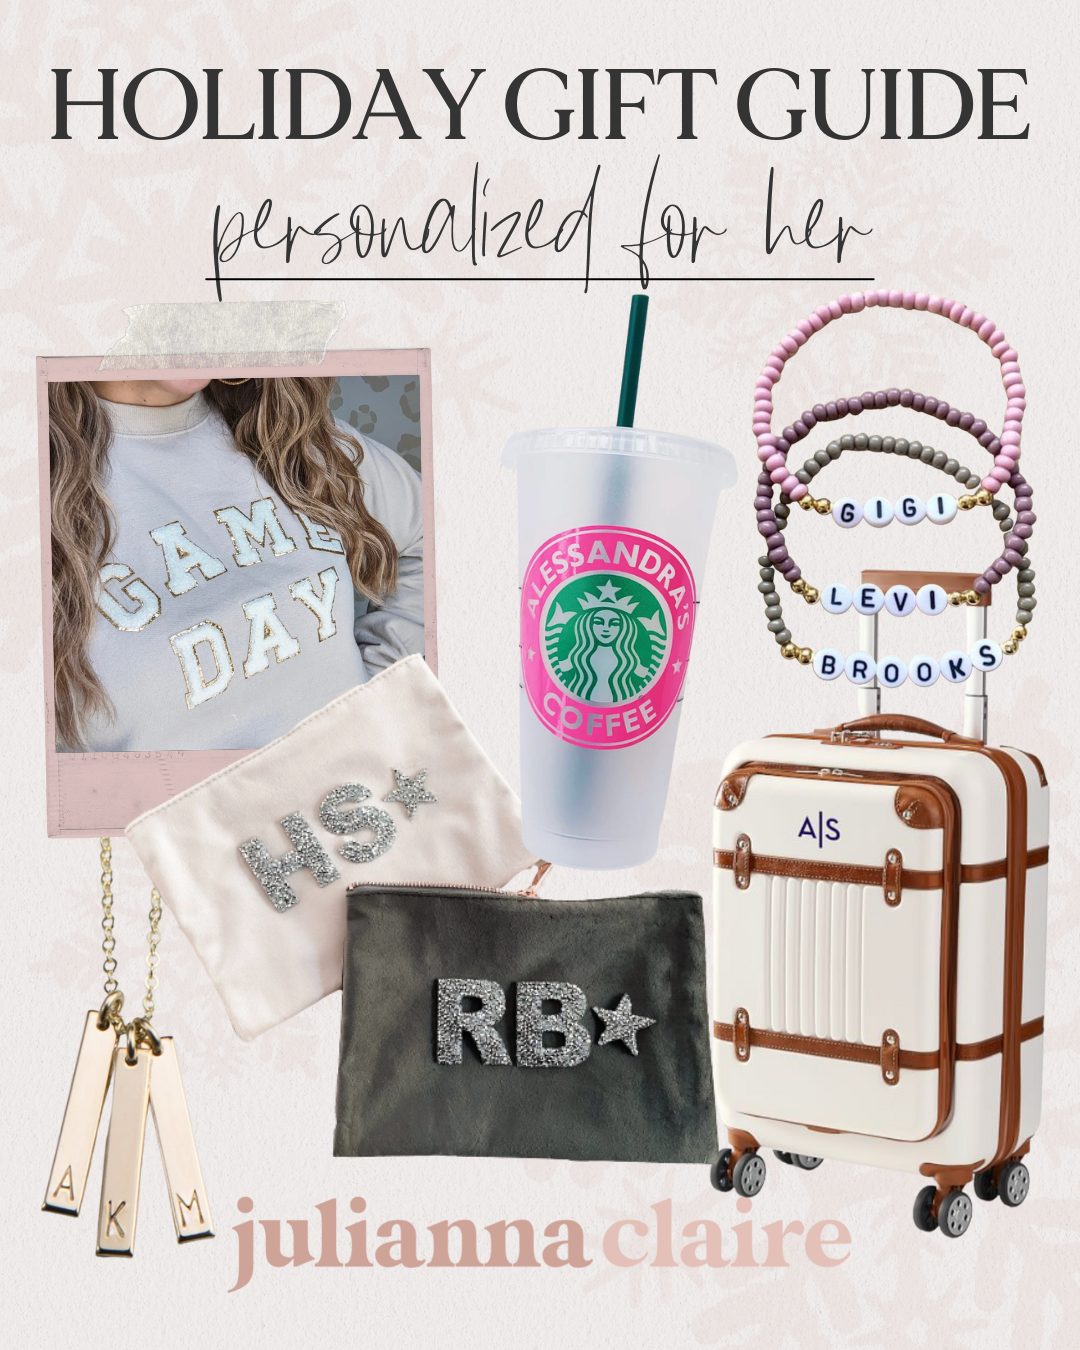 personalized gift ideas for her